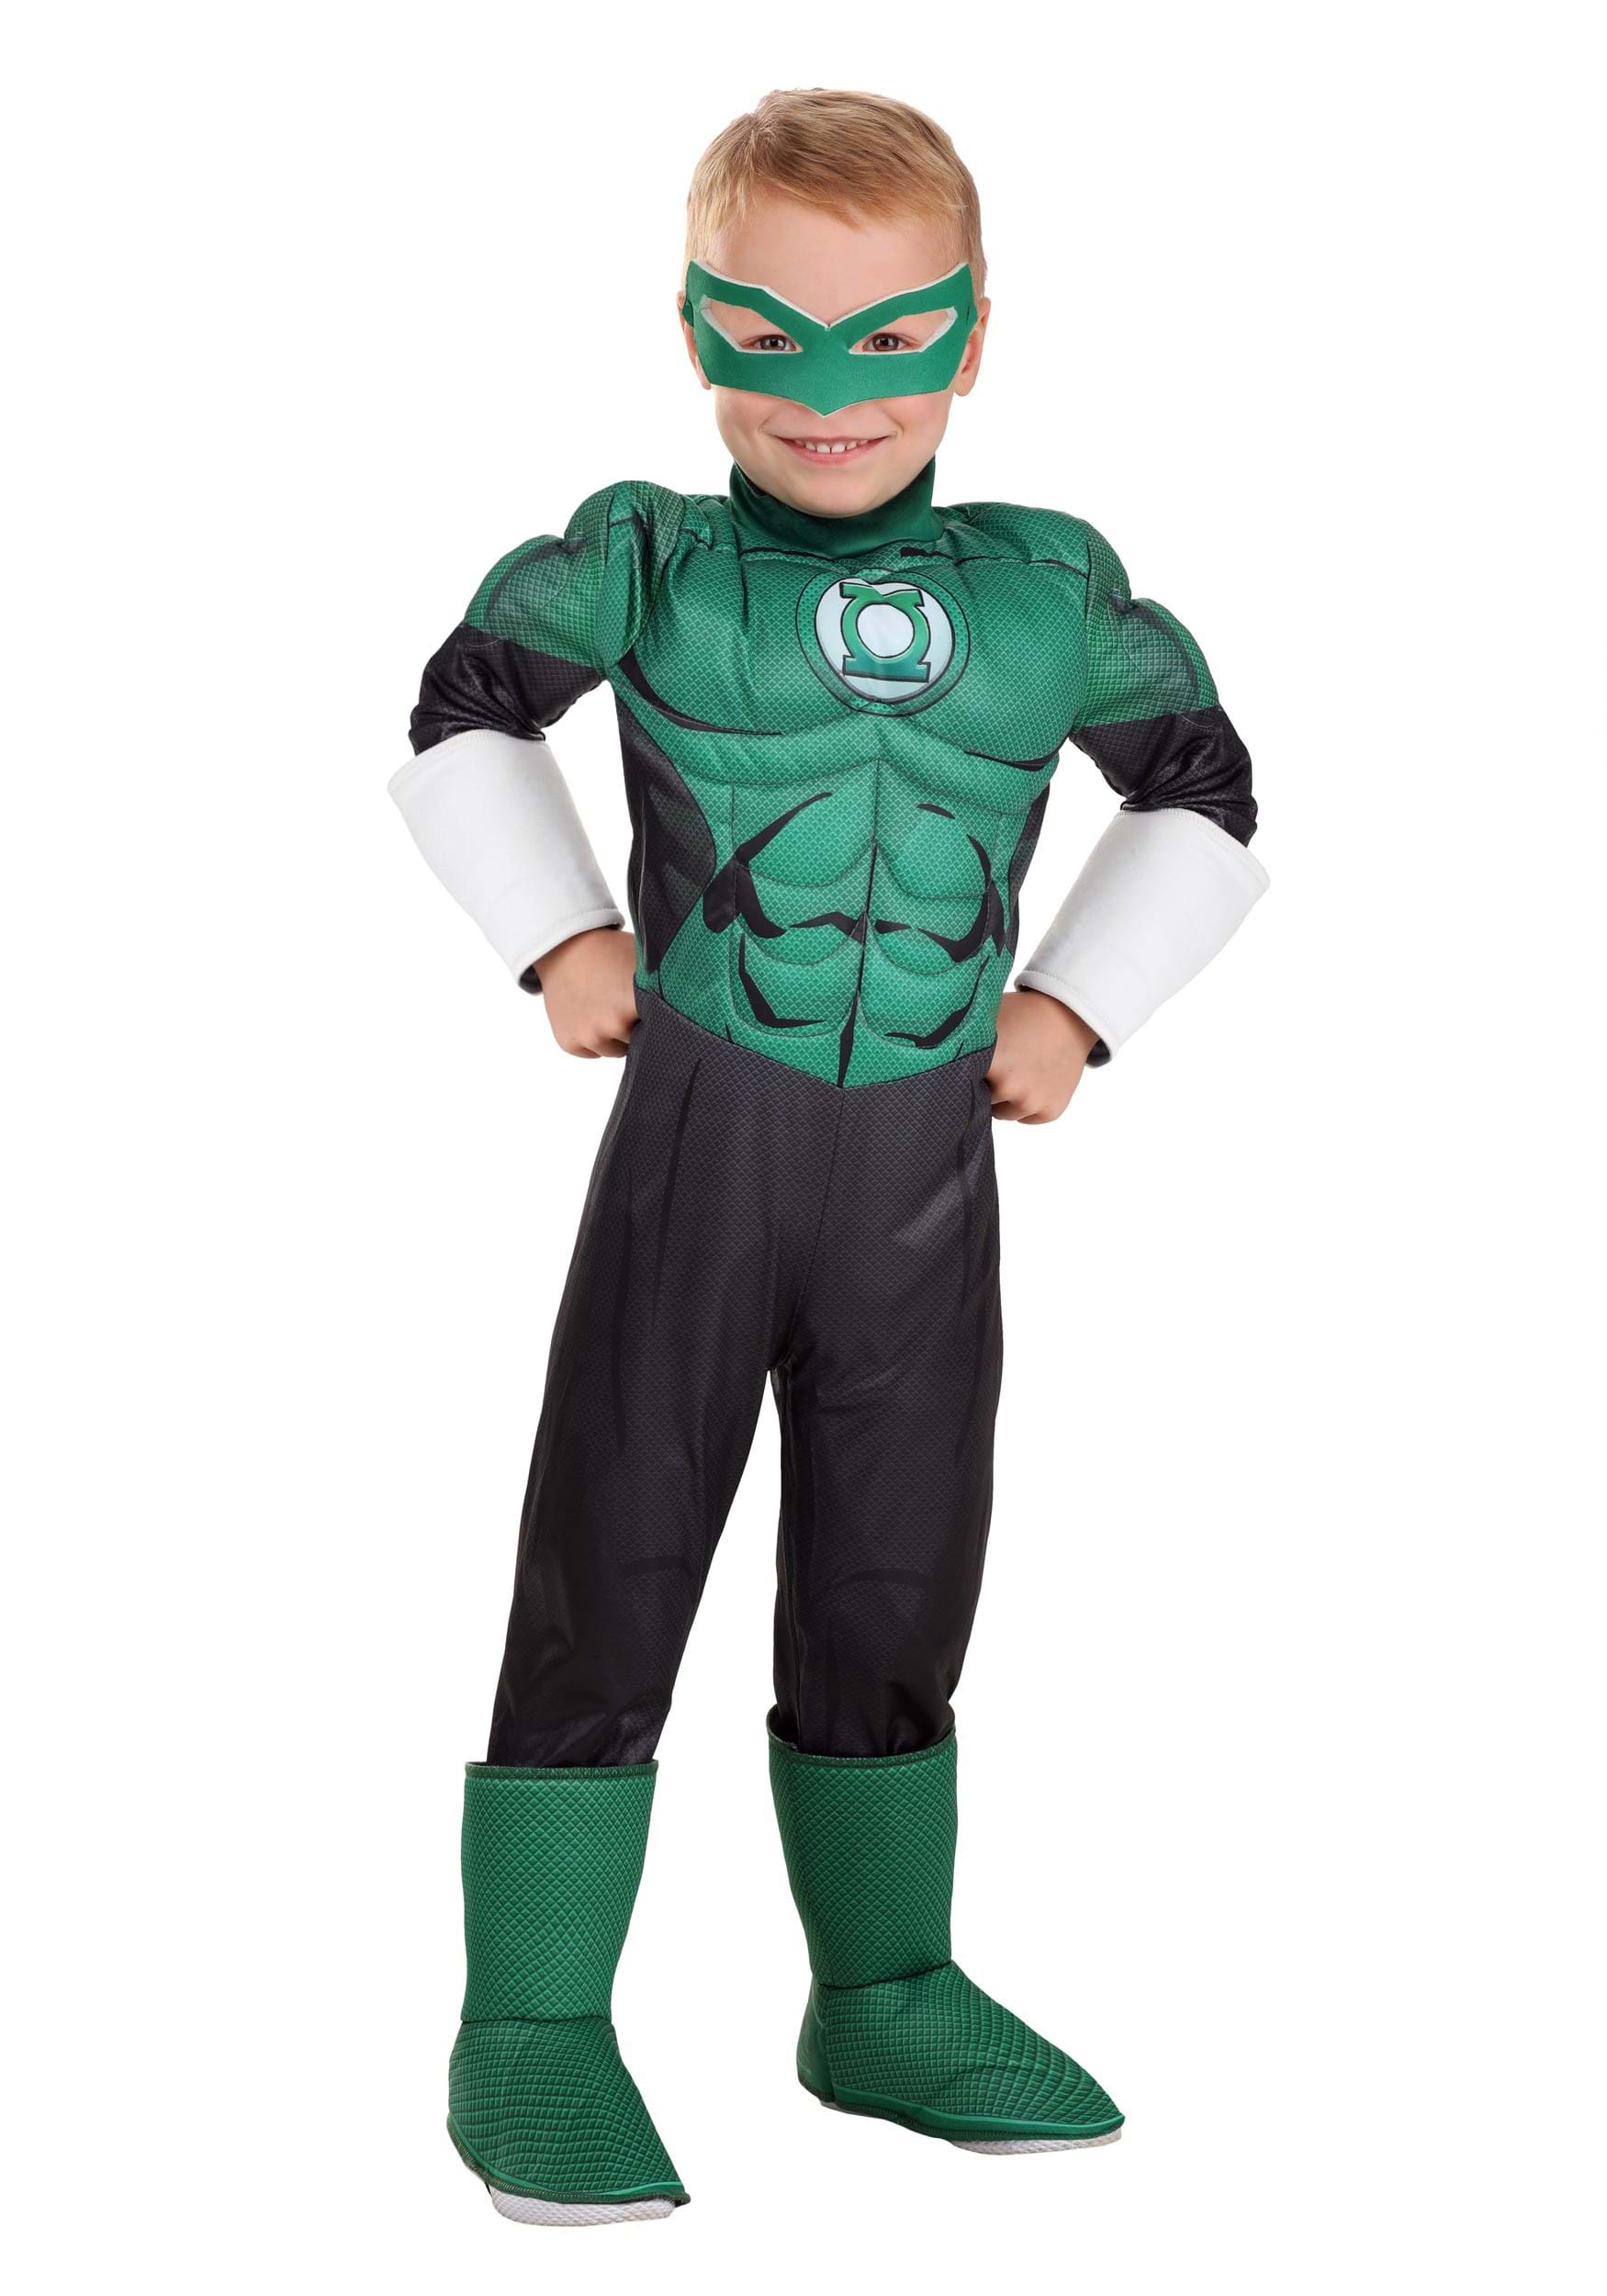 Photos - Fancy Dress Deluxe Jerry Leigh  Green Lantern Toddler Costume Black/Green/White 